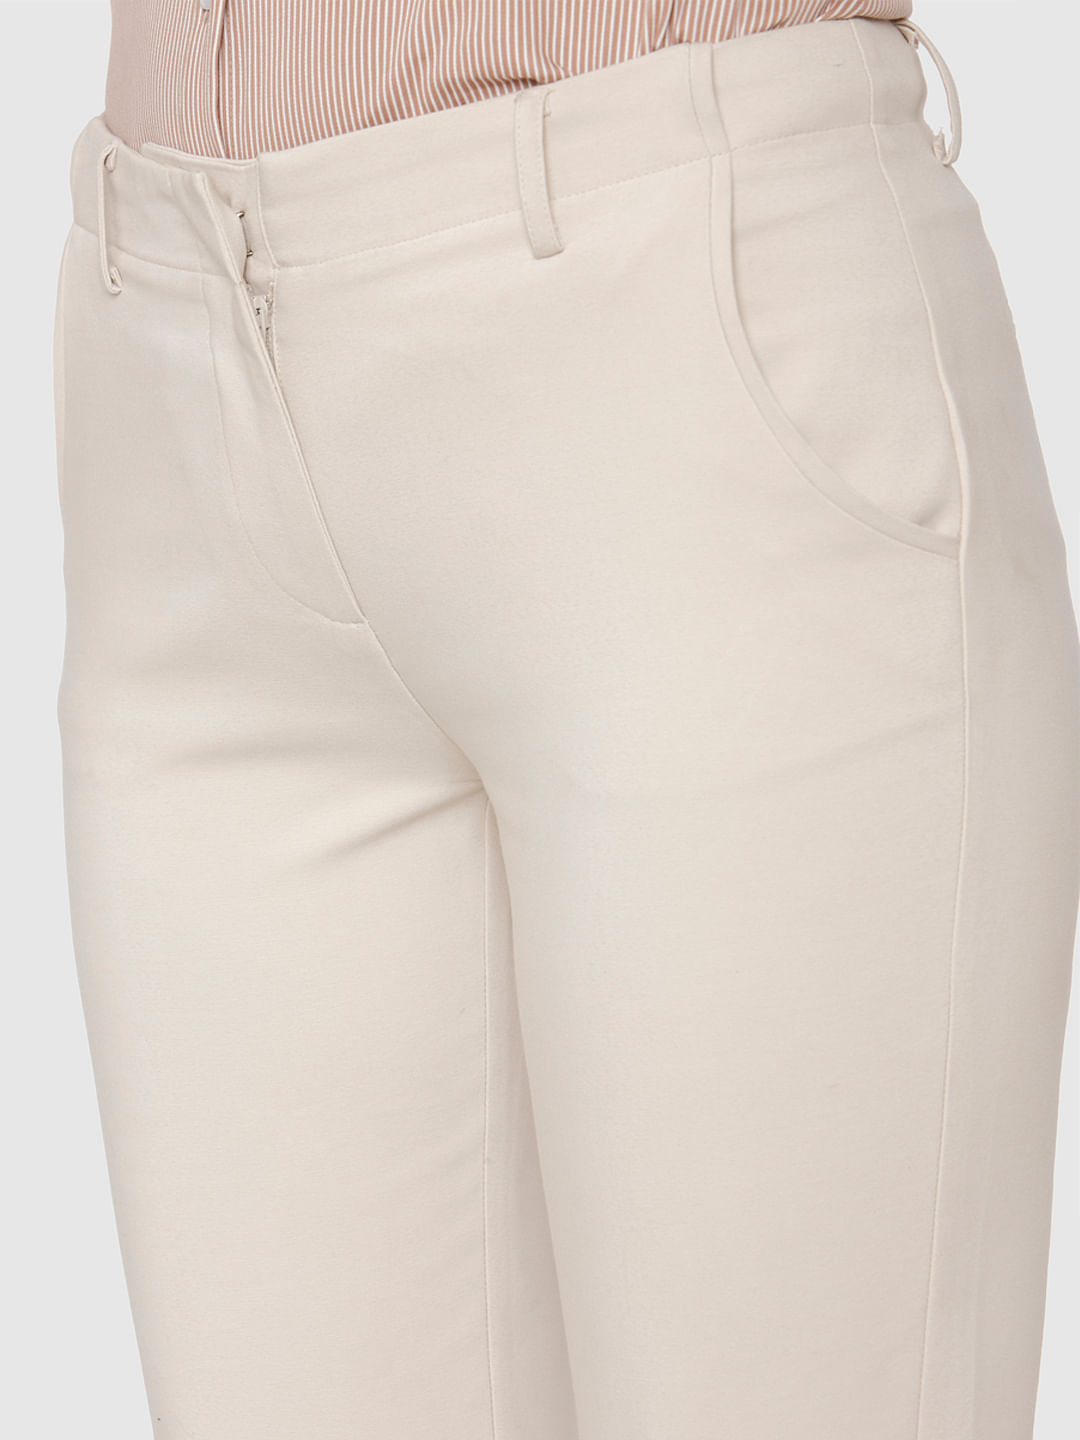 Beige M WOMEN FASHION Trousers Basic October Chino trouser discount 76% 